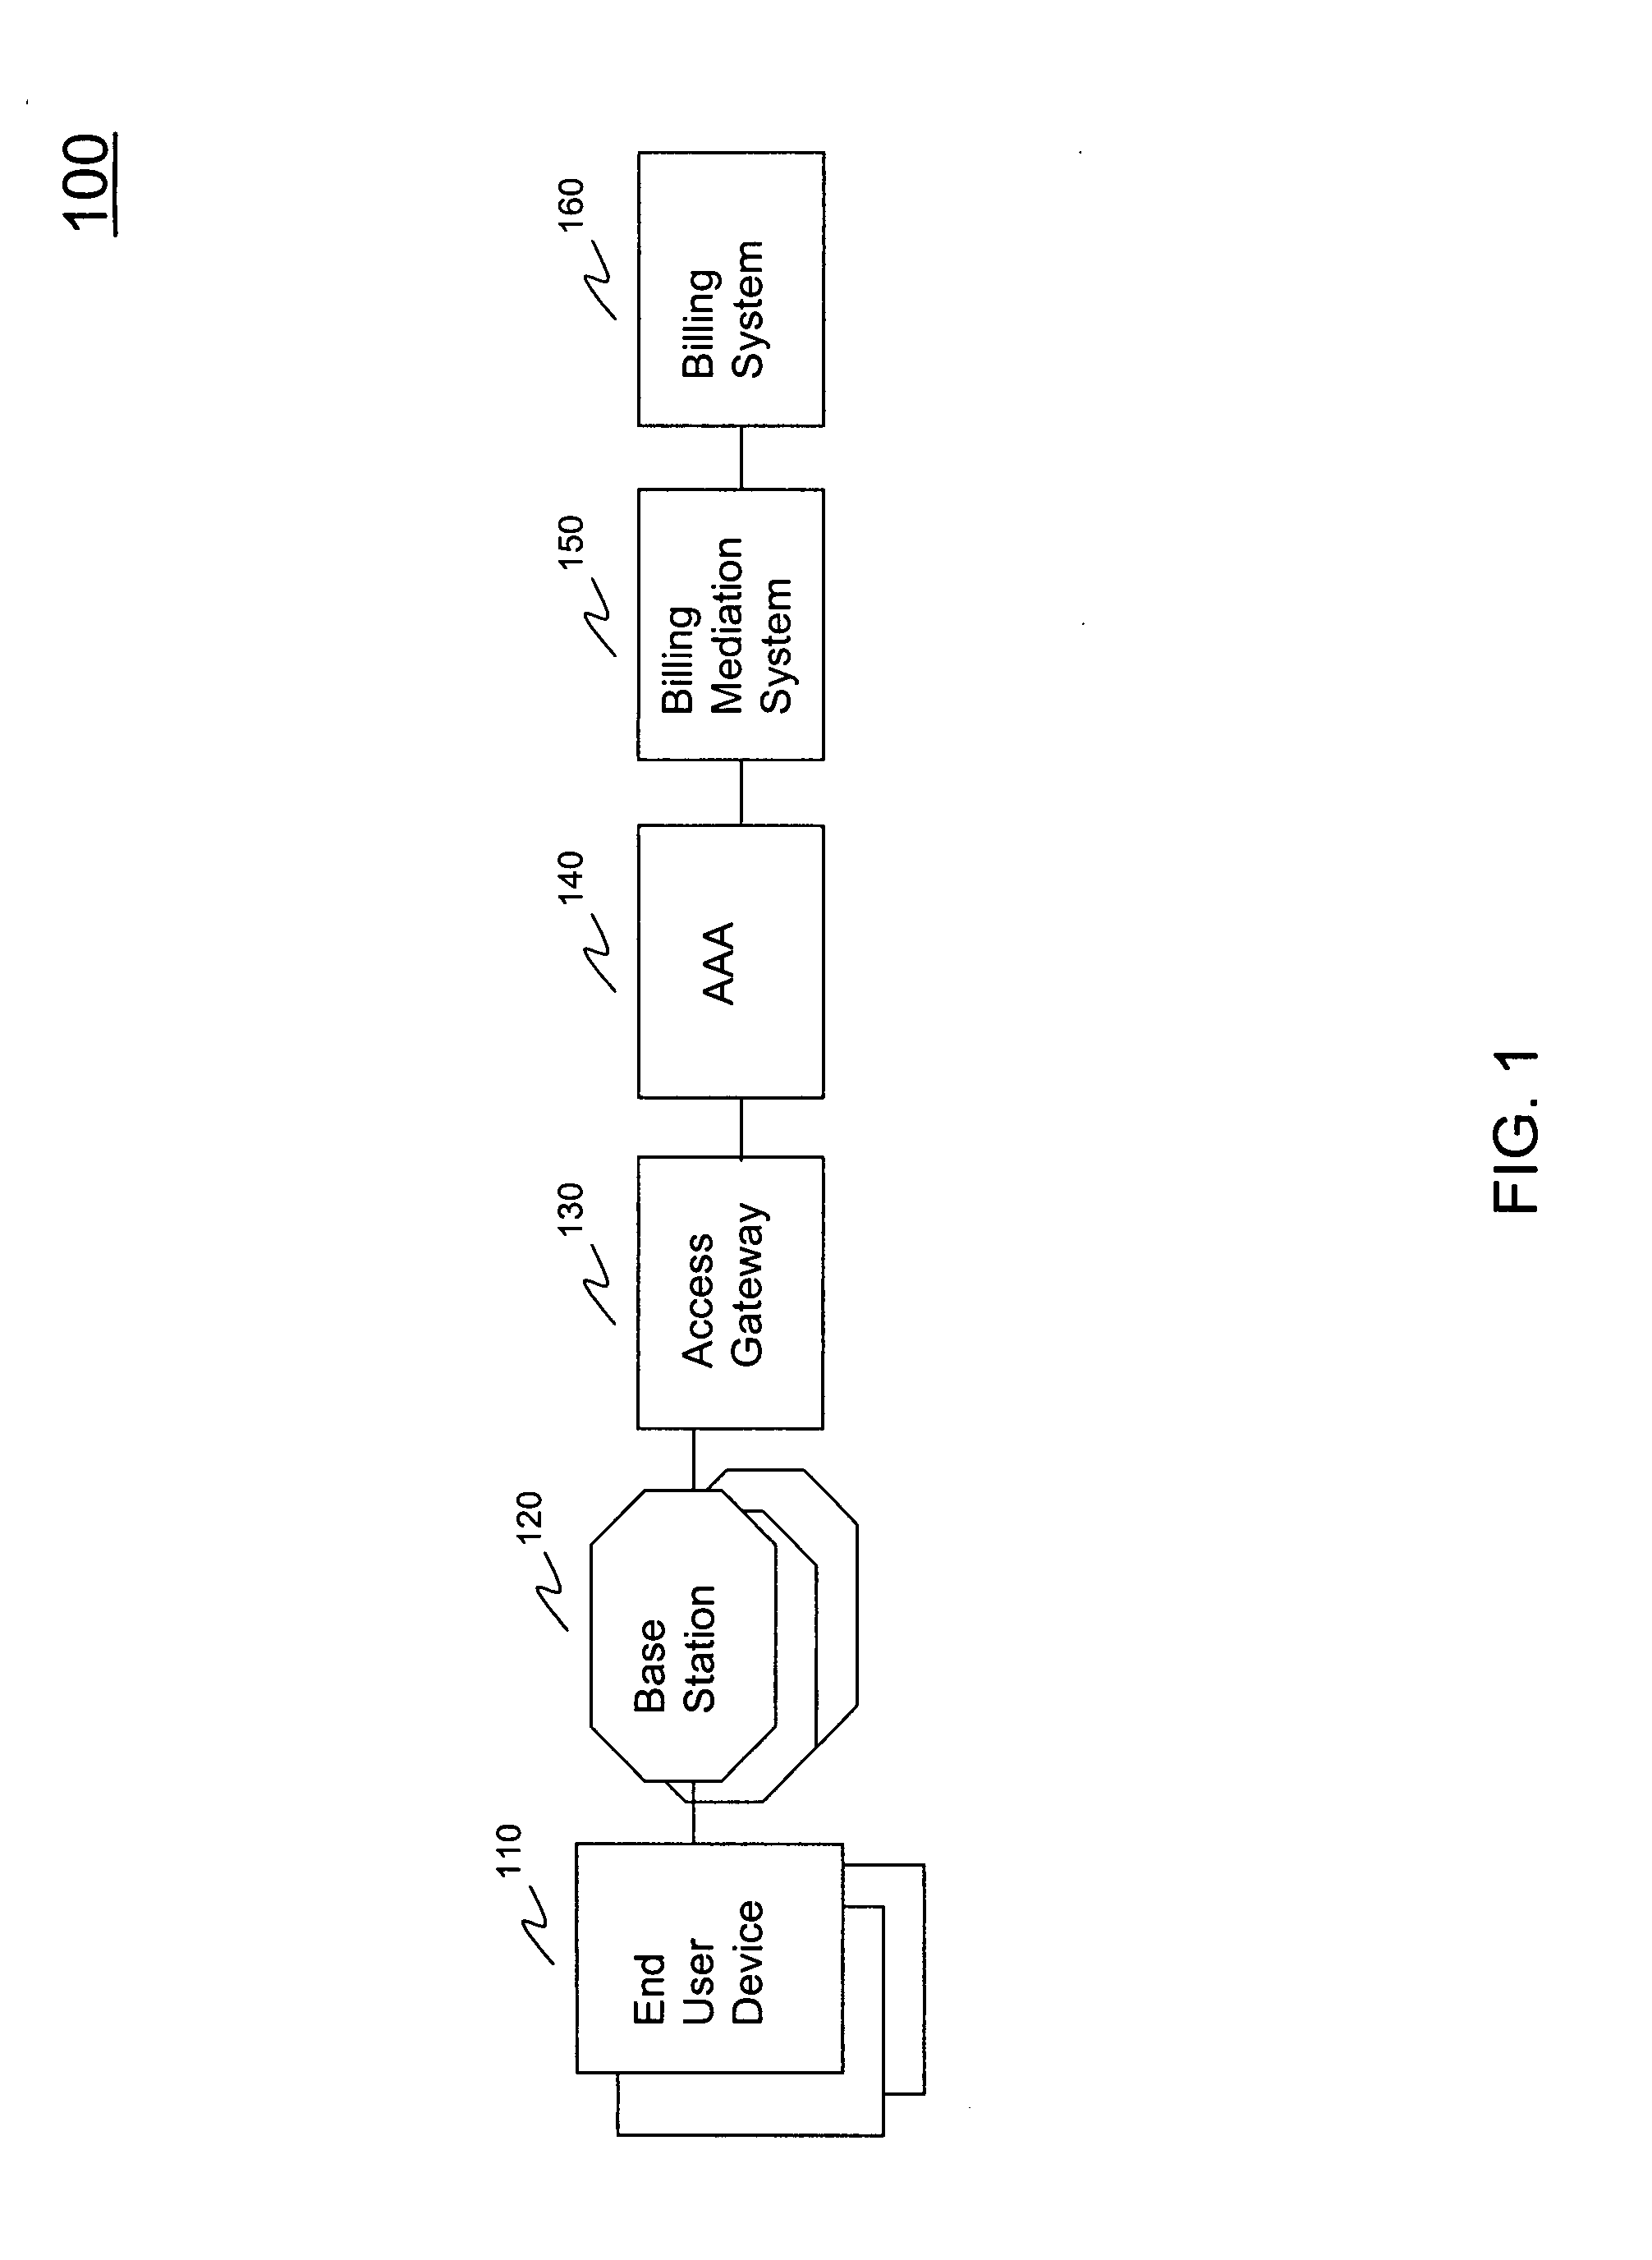 Systems and methods for session records correlation